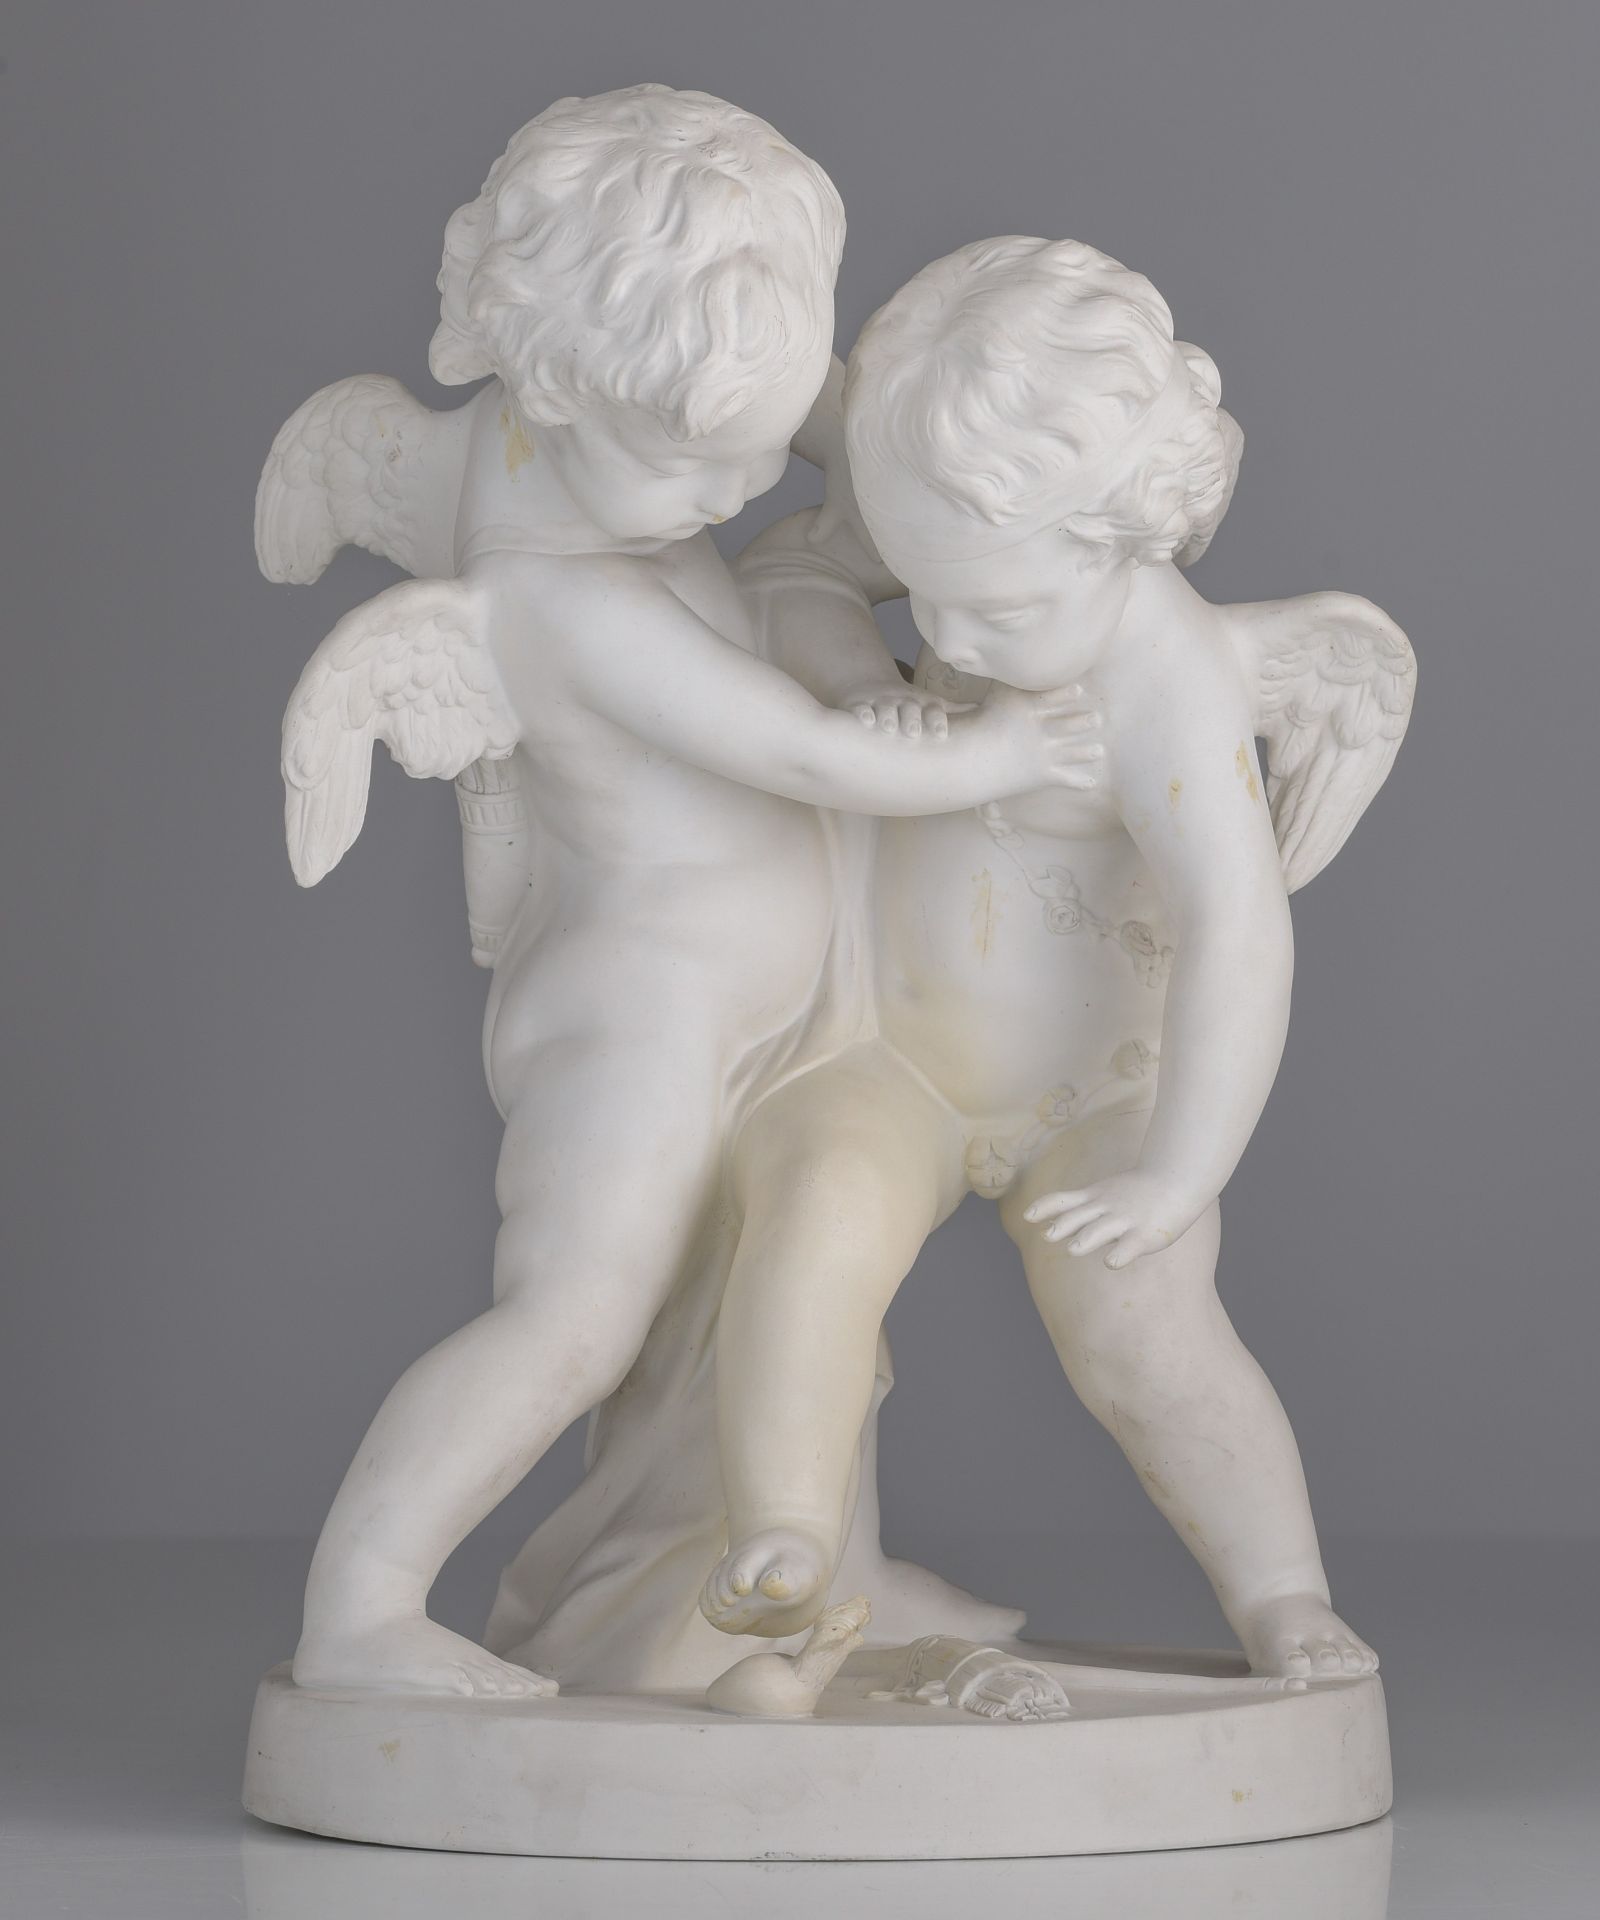 Etienne Maurice Falconet (1716-1791), 'Bataille pour l'amour', biscuit, H 37,5 cm - Image 9 of 14